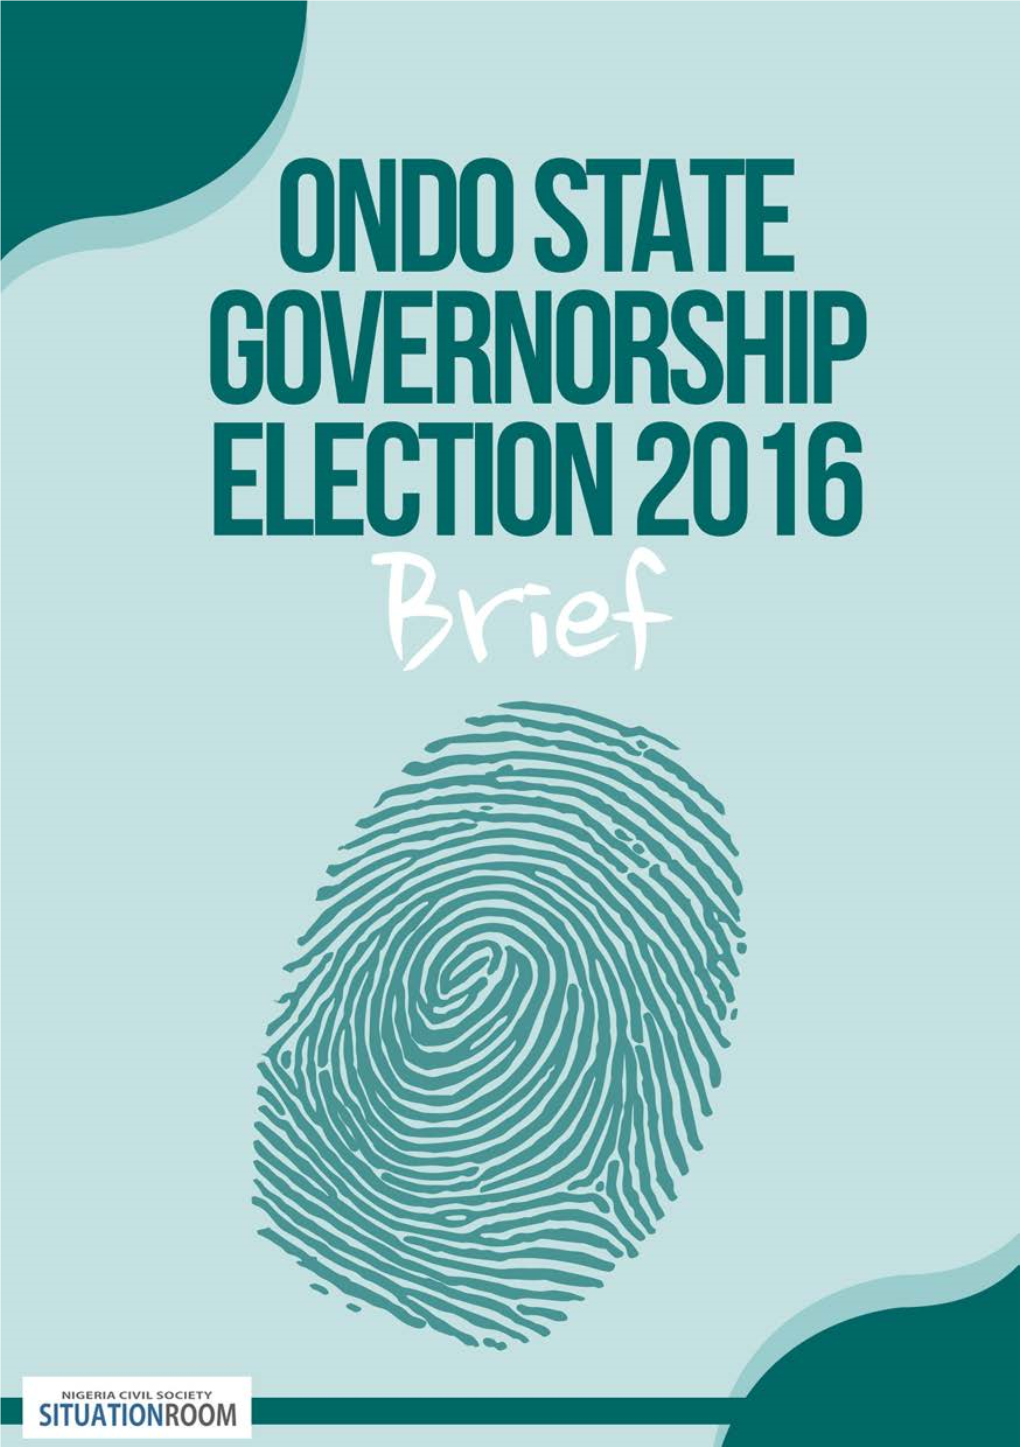 Brief on Ondo State Governorship Election